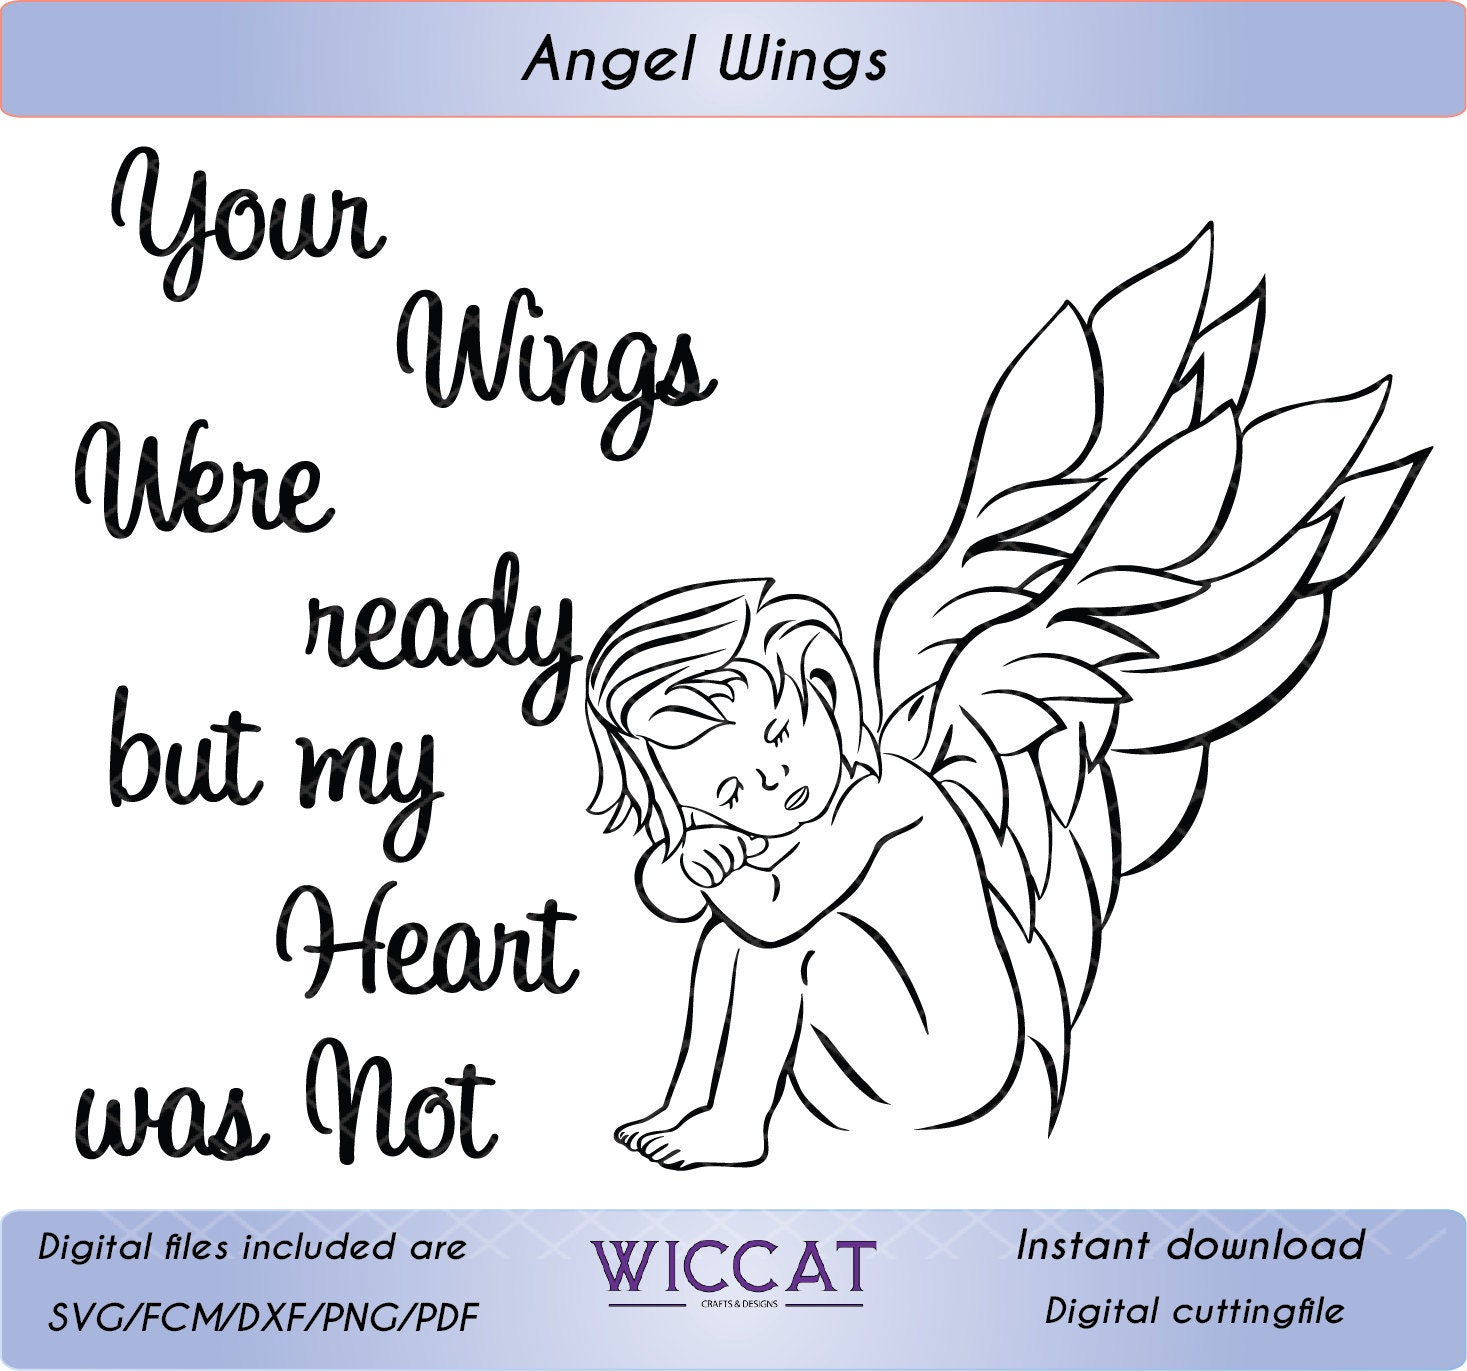 Download Angel Boy Loss quote Angel Wings svg Guardian by WiccatDesign